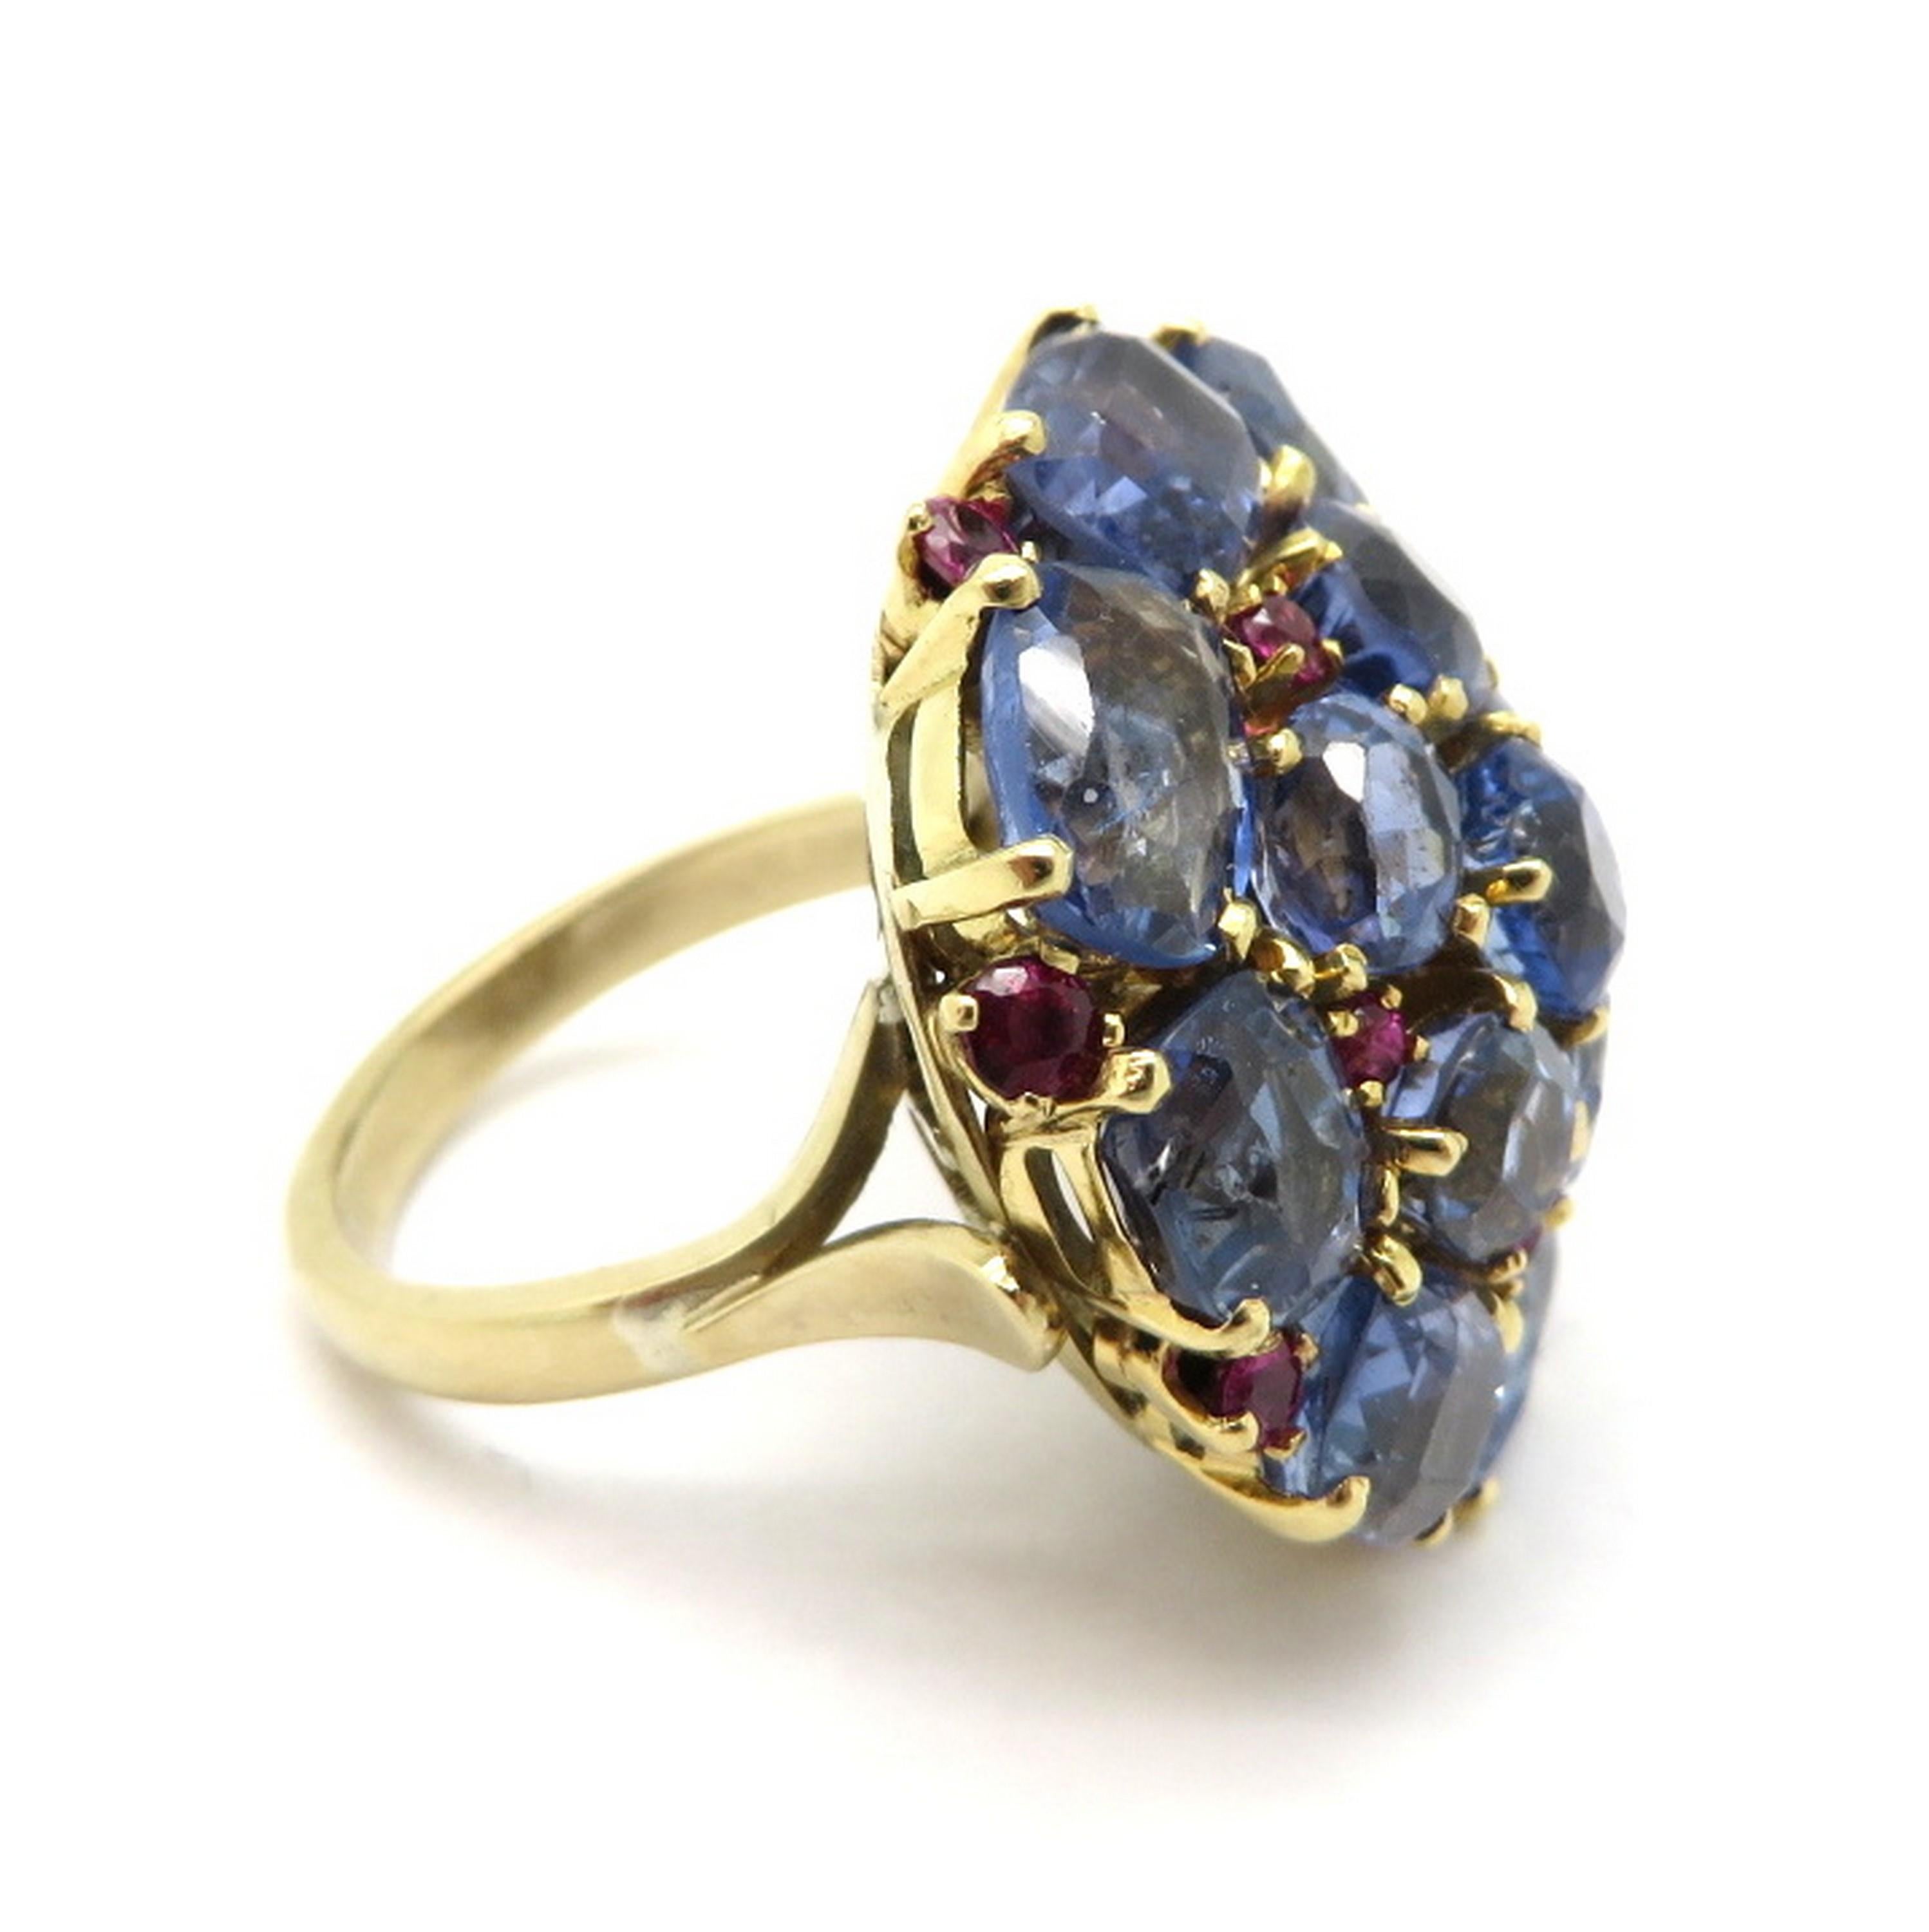 Antique Cushion Cut Estate 14 Karat Gold 20.00 Carat GIA Certified Sapphire and Ruby Cluster Ring For Sale